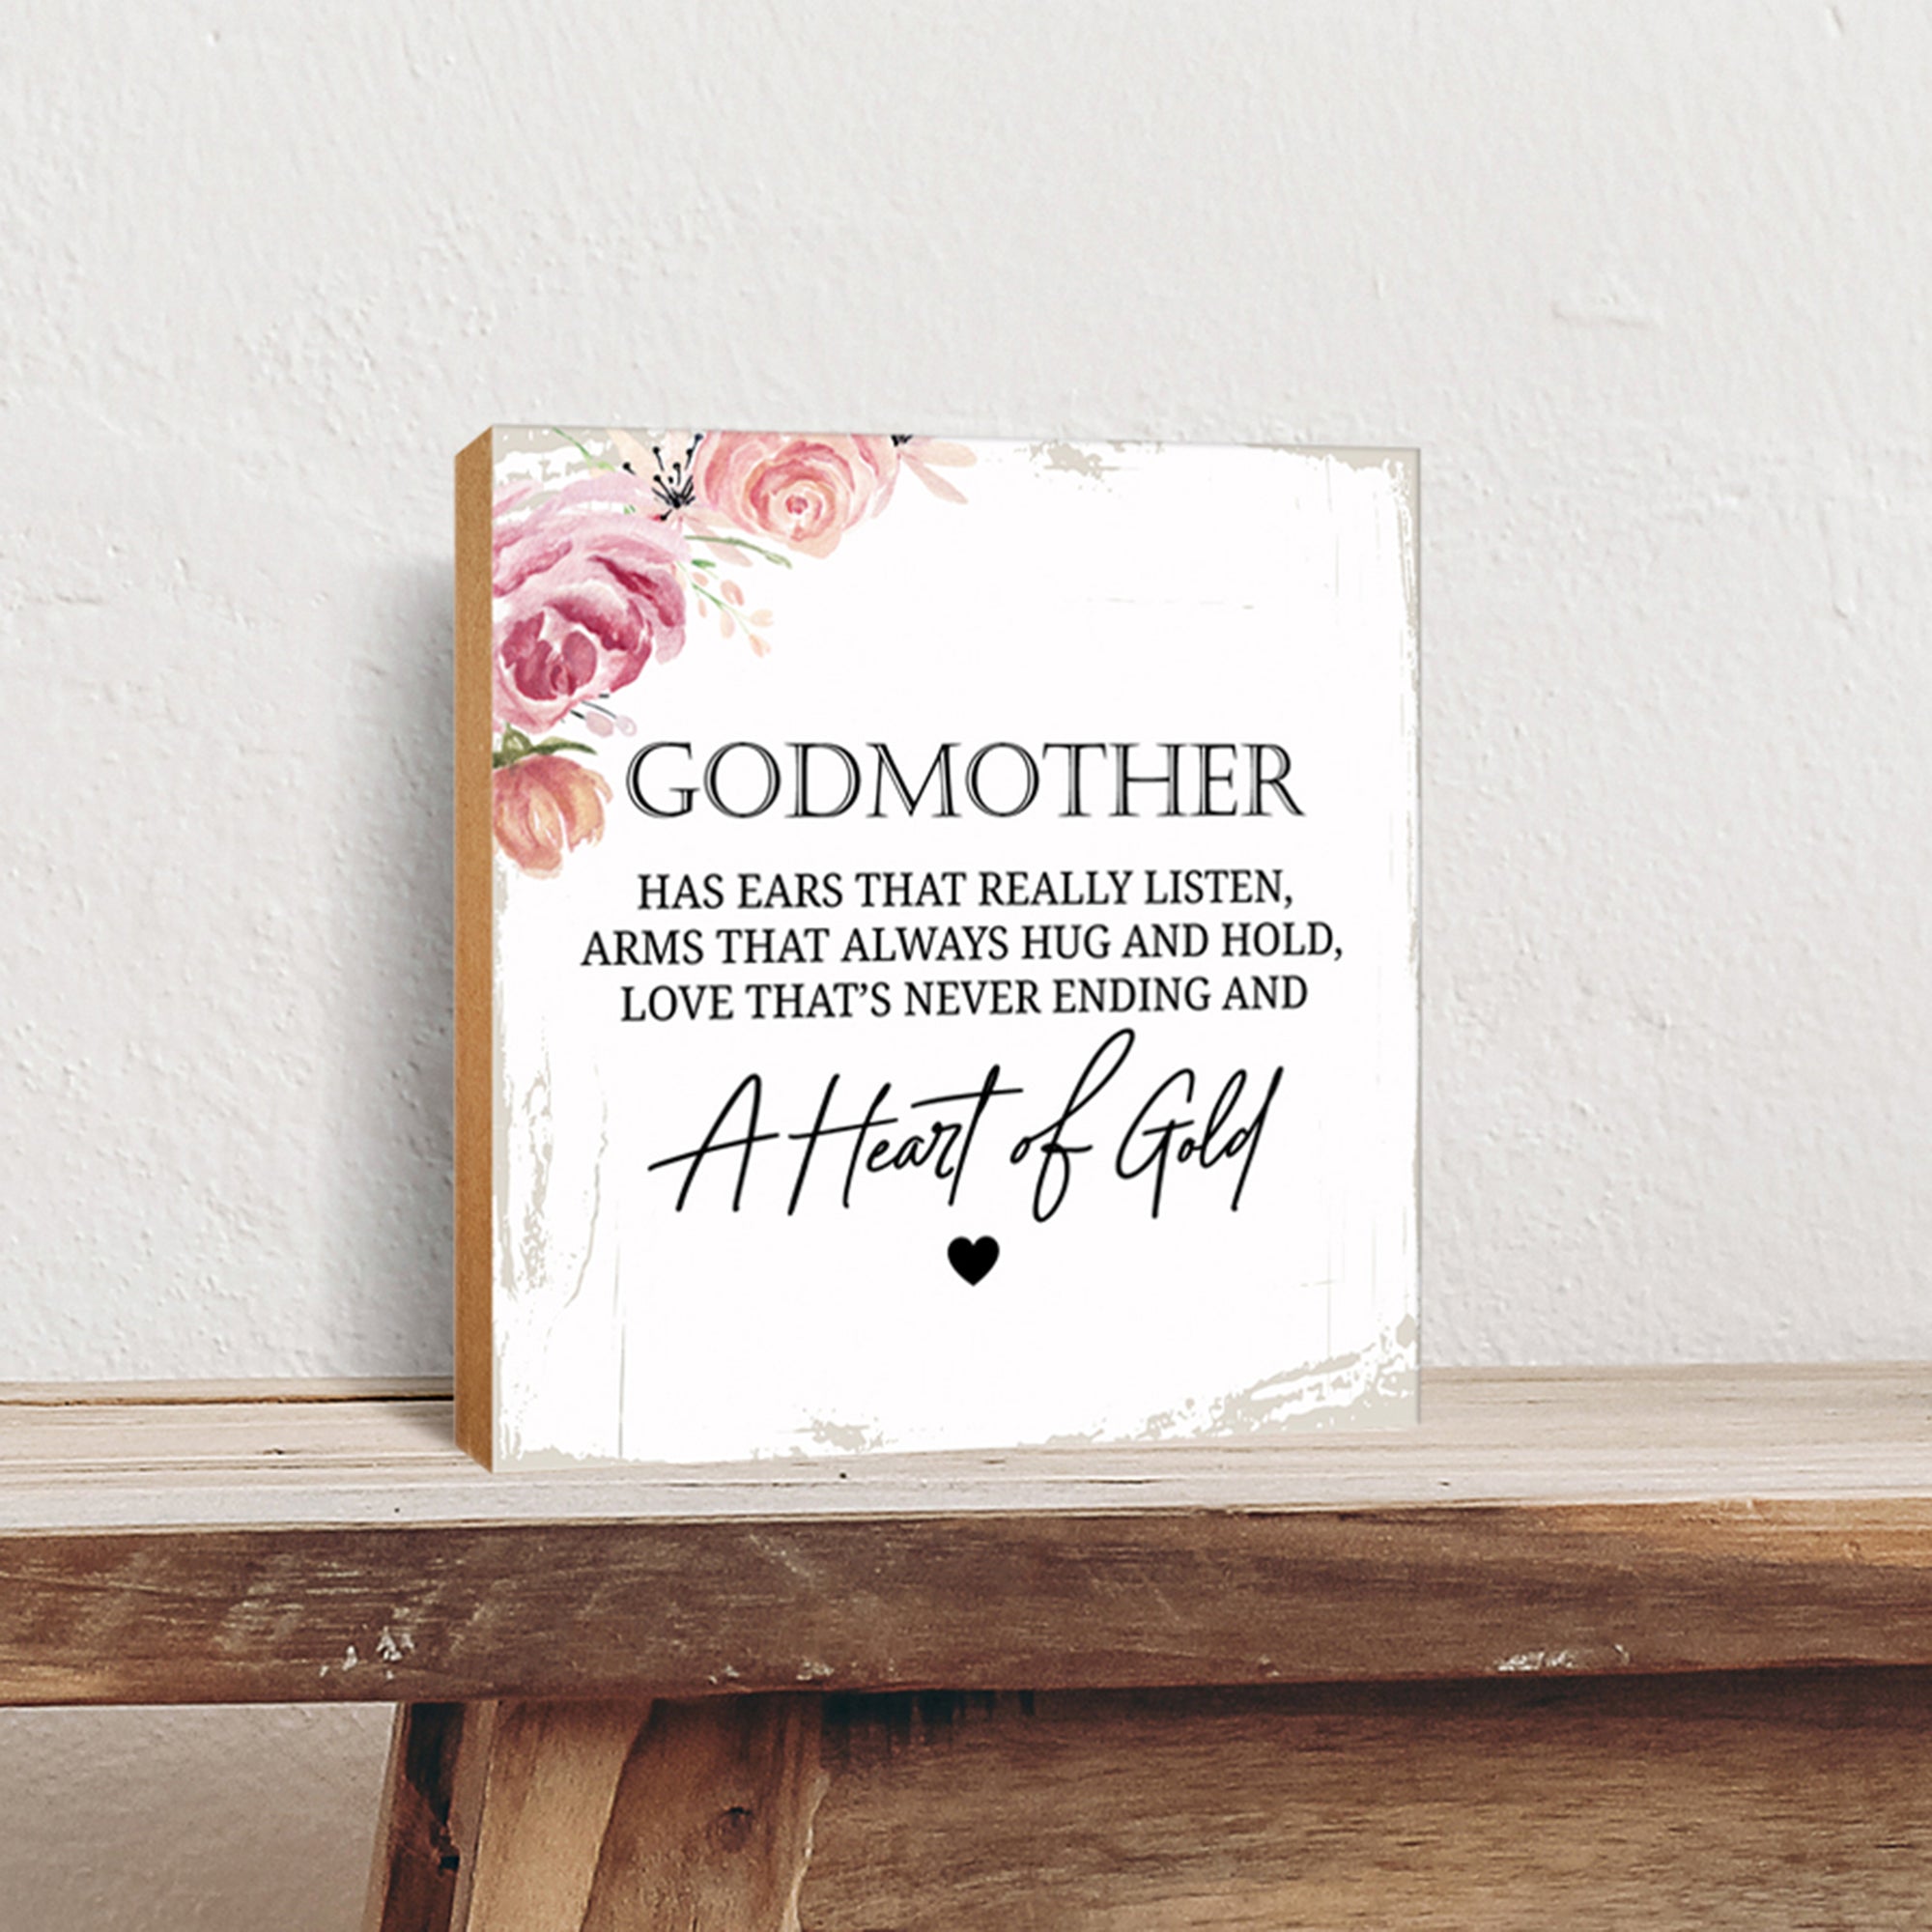 LifeSong Milestones Godmother Has Ears Heart Floral 6x6 Inches Wood Family Art Sign Tabletop and Shelving For Home Décor. Wood Family Signs, art sign tabletop, Wood Art Decor for Living Room, Bedroom, Kitchen, Dining Room, and Entryways Home Art Sign Decor.